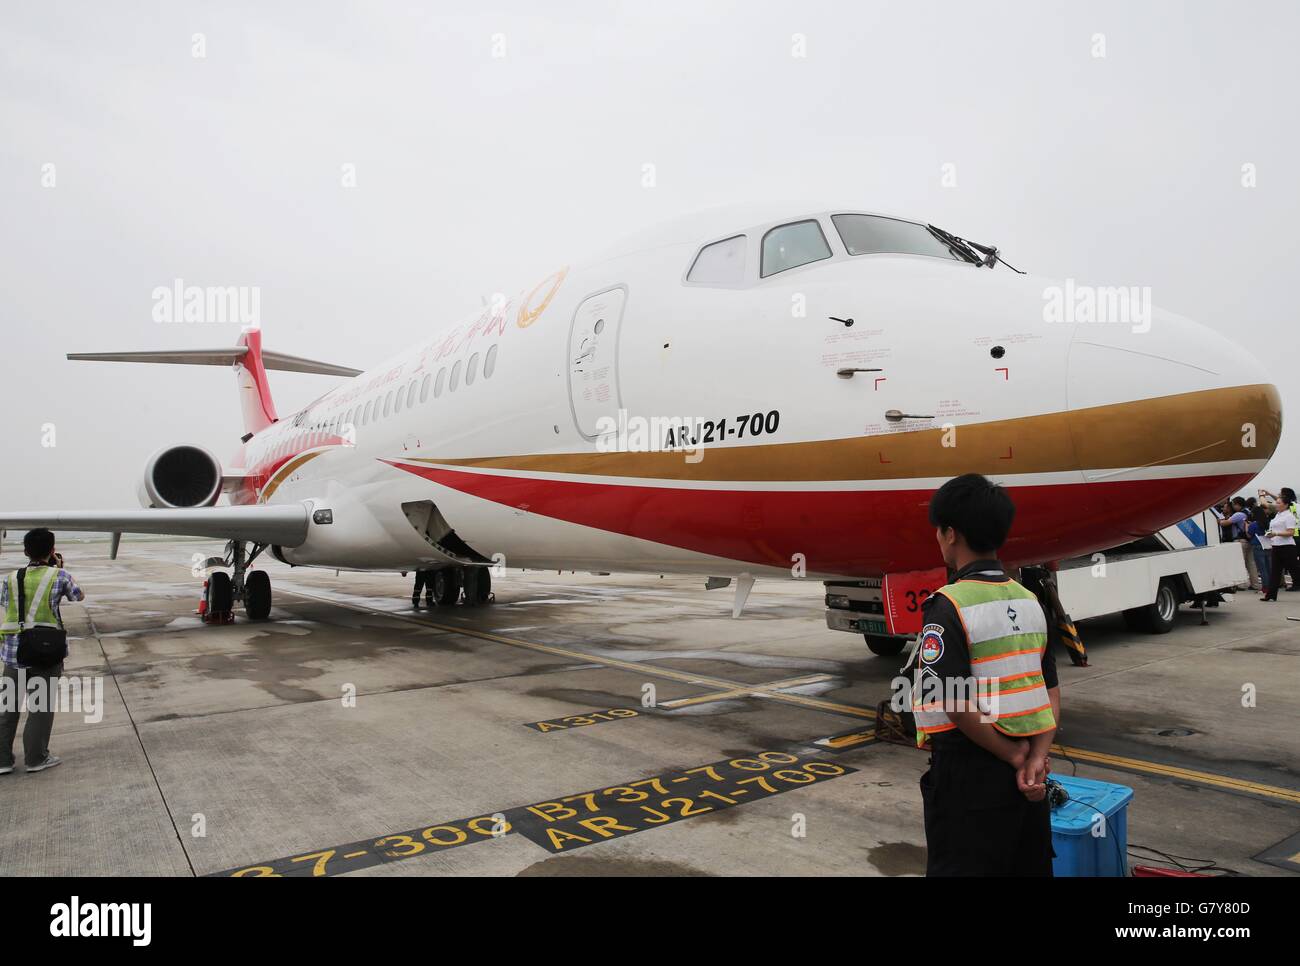 Shanghai, China. 28th June, 2016. Chengdu Airlines ARJ21-700 arrives at Hongqiao International Airport in Shanghai, east China, June 28, 2016. ARJ21, manufactured by the Commercial Aircraft Corp. of China (COMAC), made its maiden commercial flight from Chengdu, captial of southwest China's Sichuan Province, to Shanghai on Tuesday. The domestically-designed airliner is China's first regional jet manufactured according to international standards. © Pei Xin/Xinhua/Alamy Live News Stock Photo